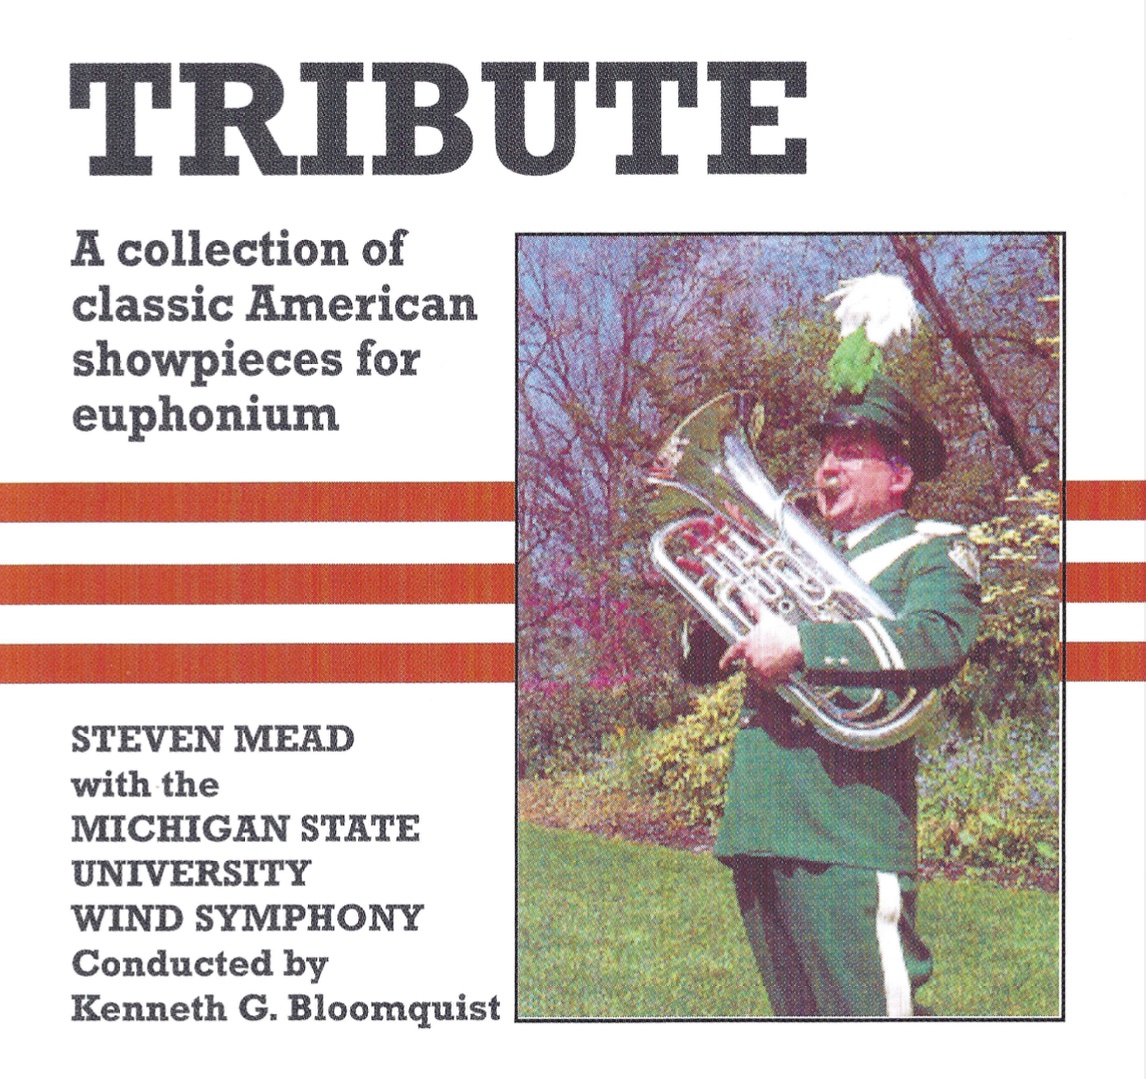 CD Tribute - Steven Mead and the Michigan State Wind Orchestra cond. Kenneth G. Bloomquist 